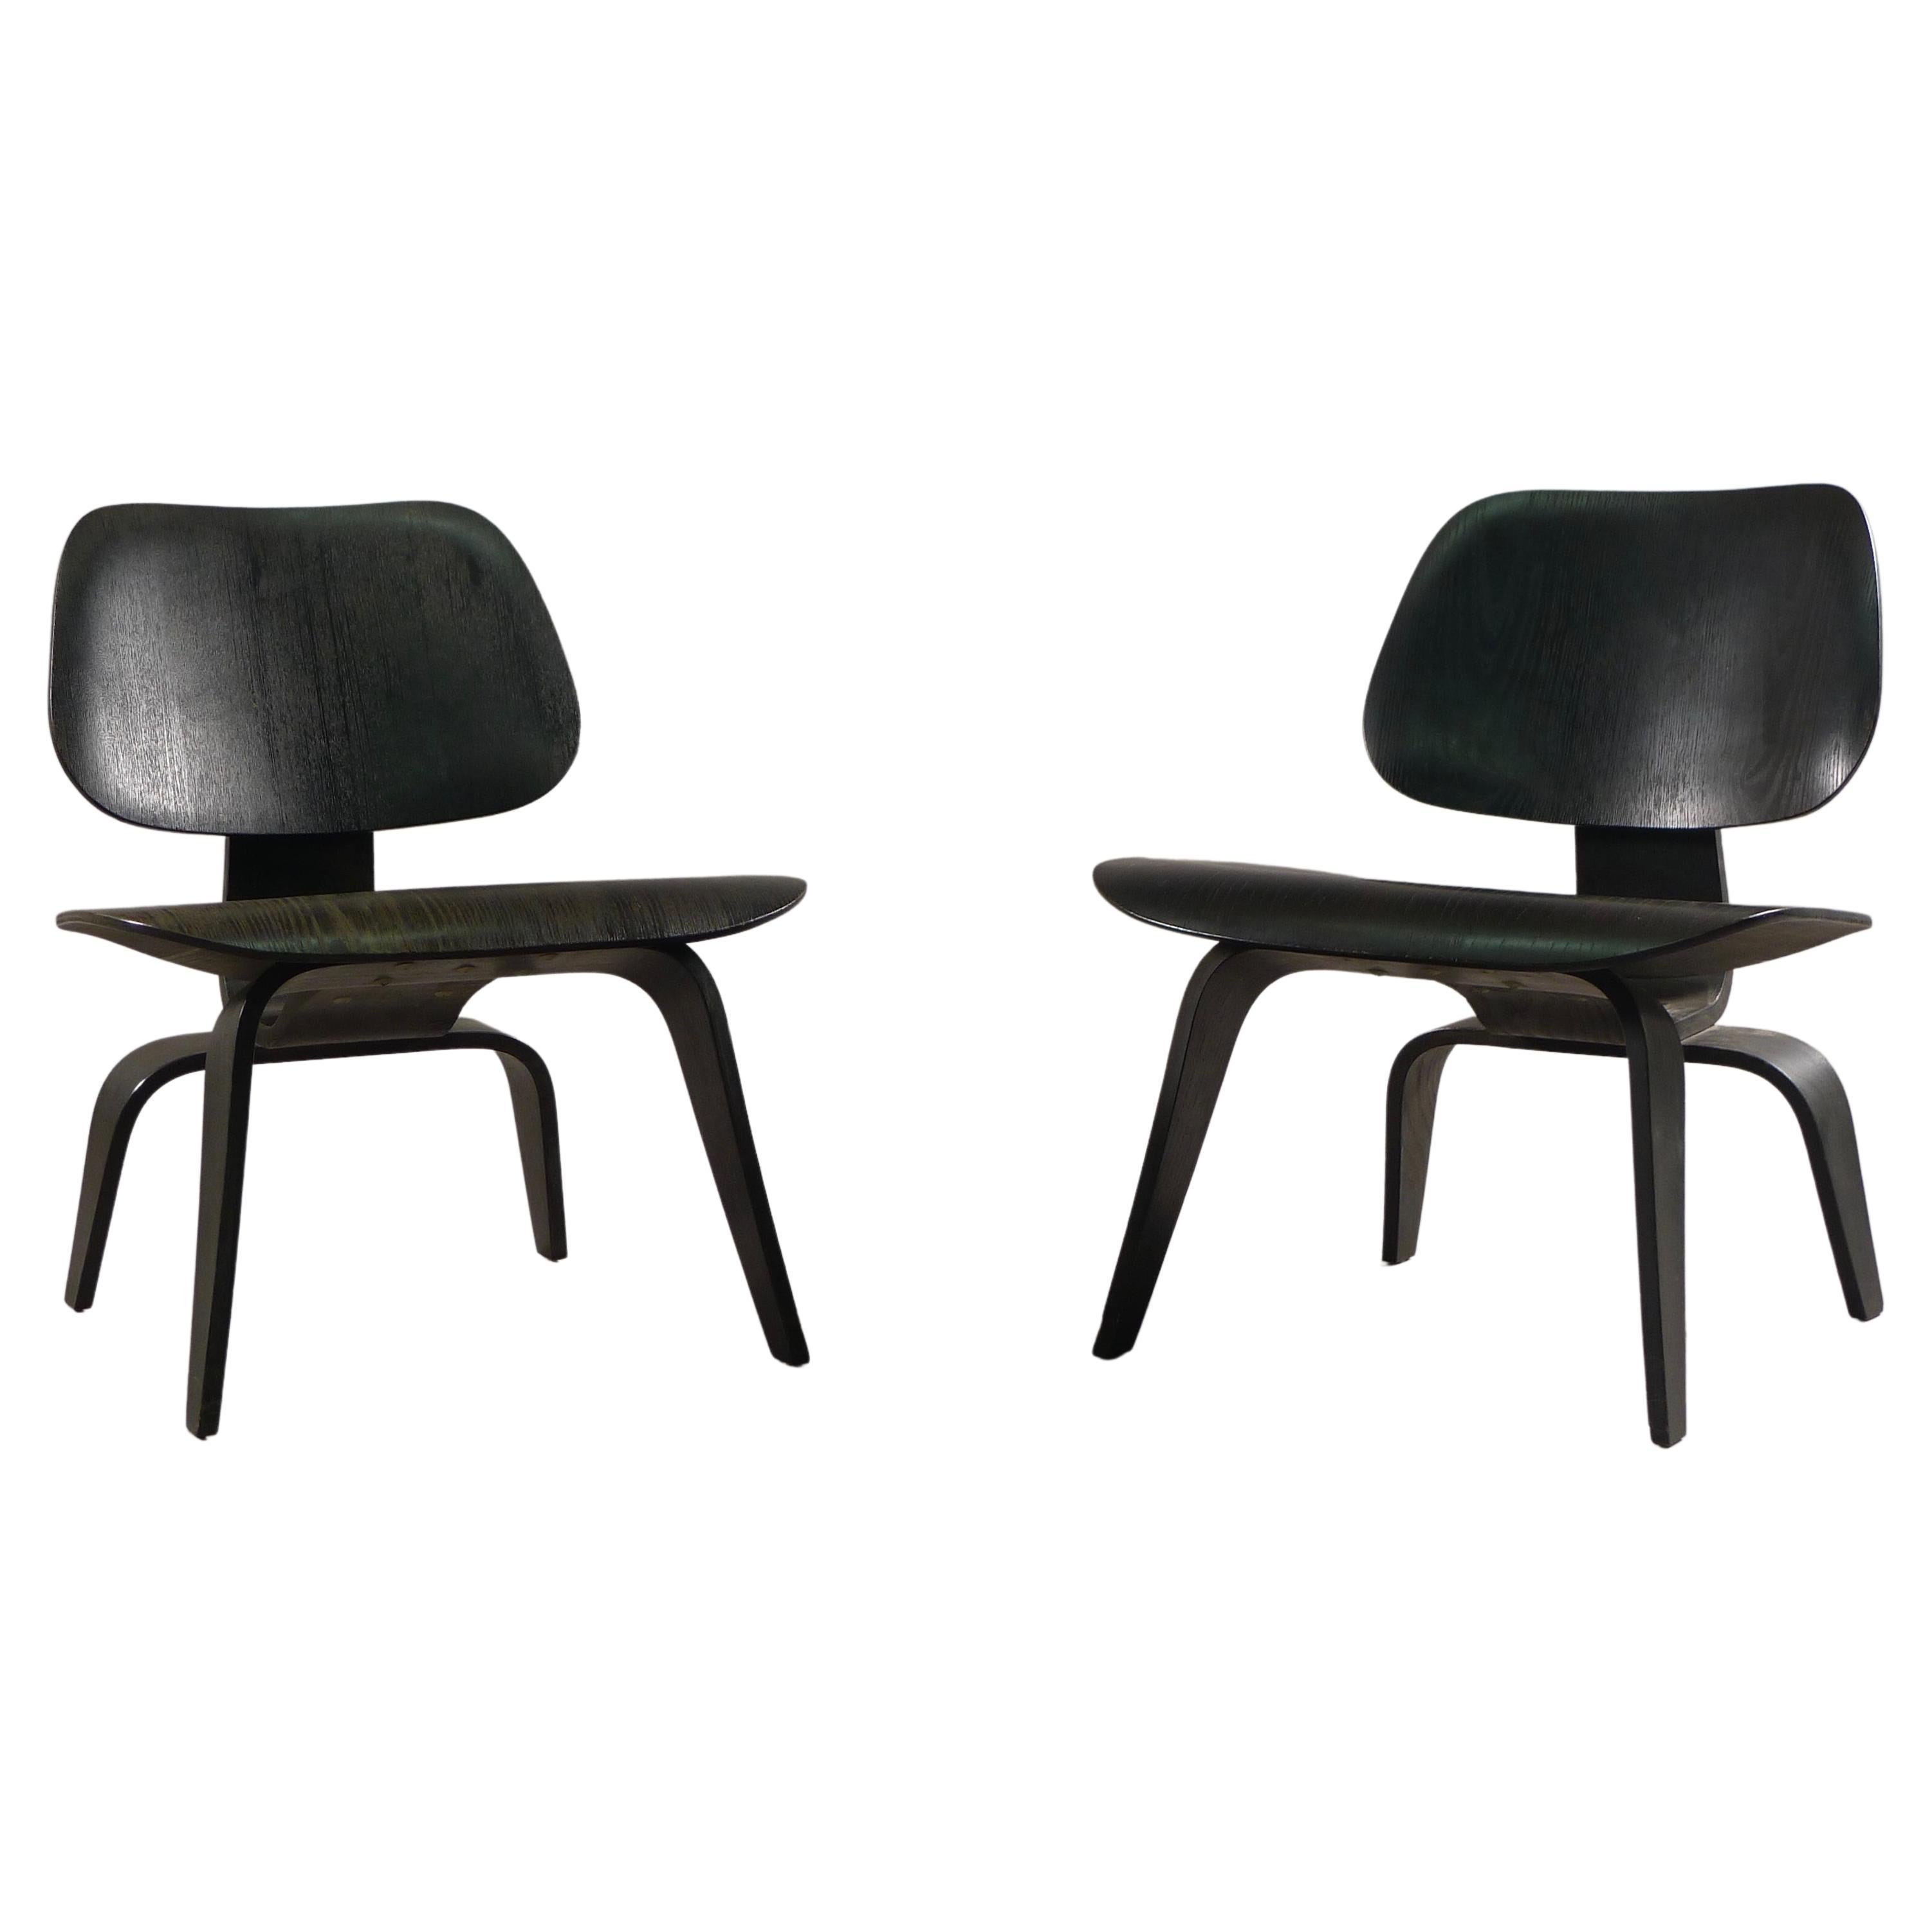 Charles and Ray Eames Pair of Early Evans Production Original LCW Chairs